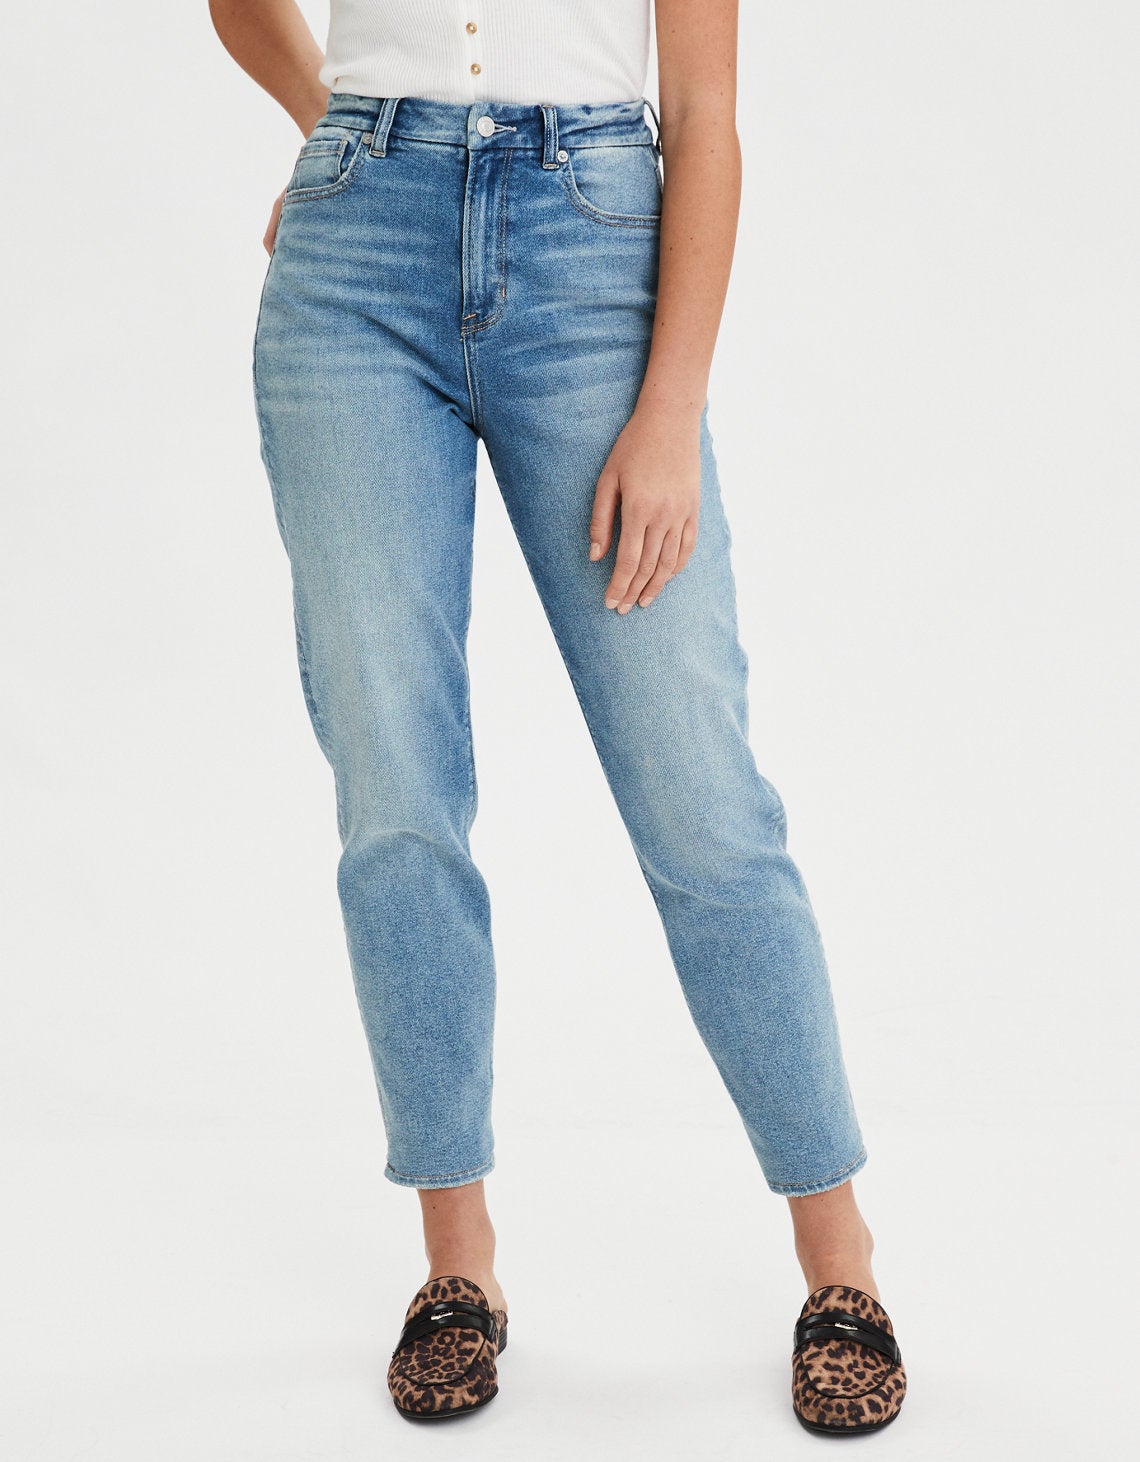 American Eagle launches extended sizing for denim - Just Style